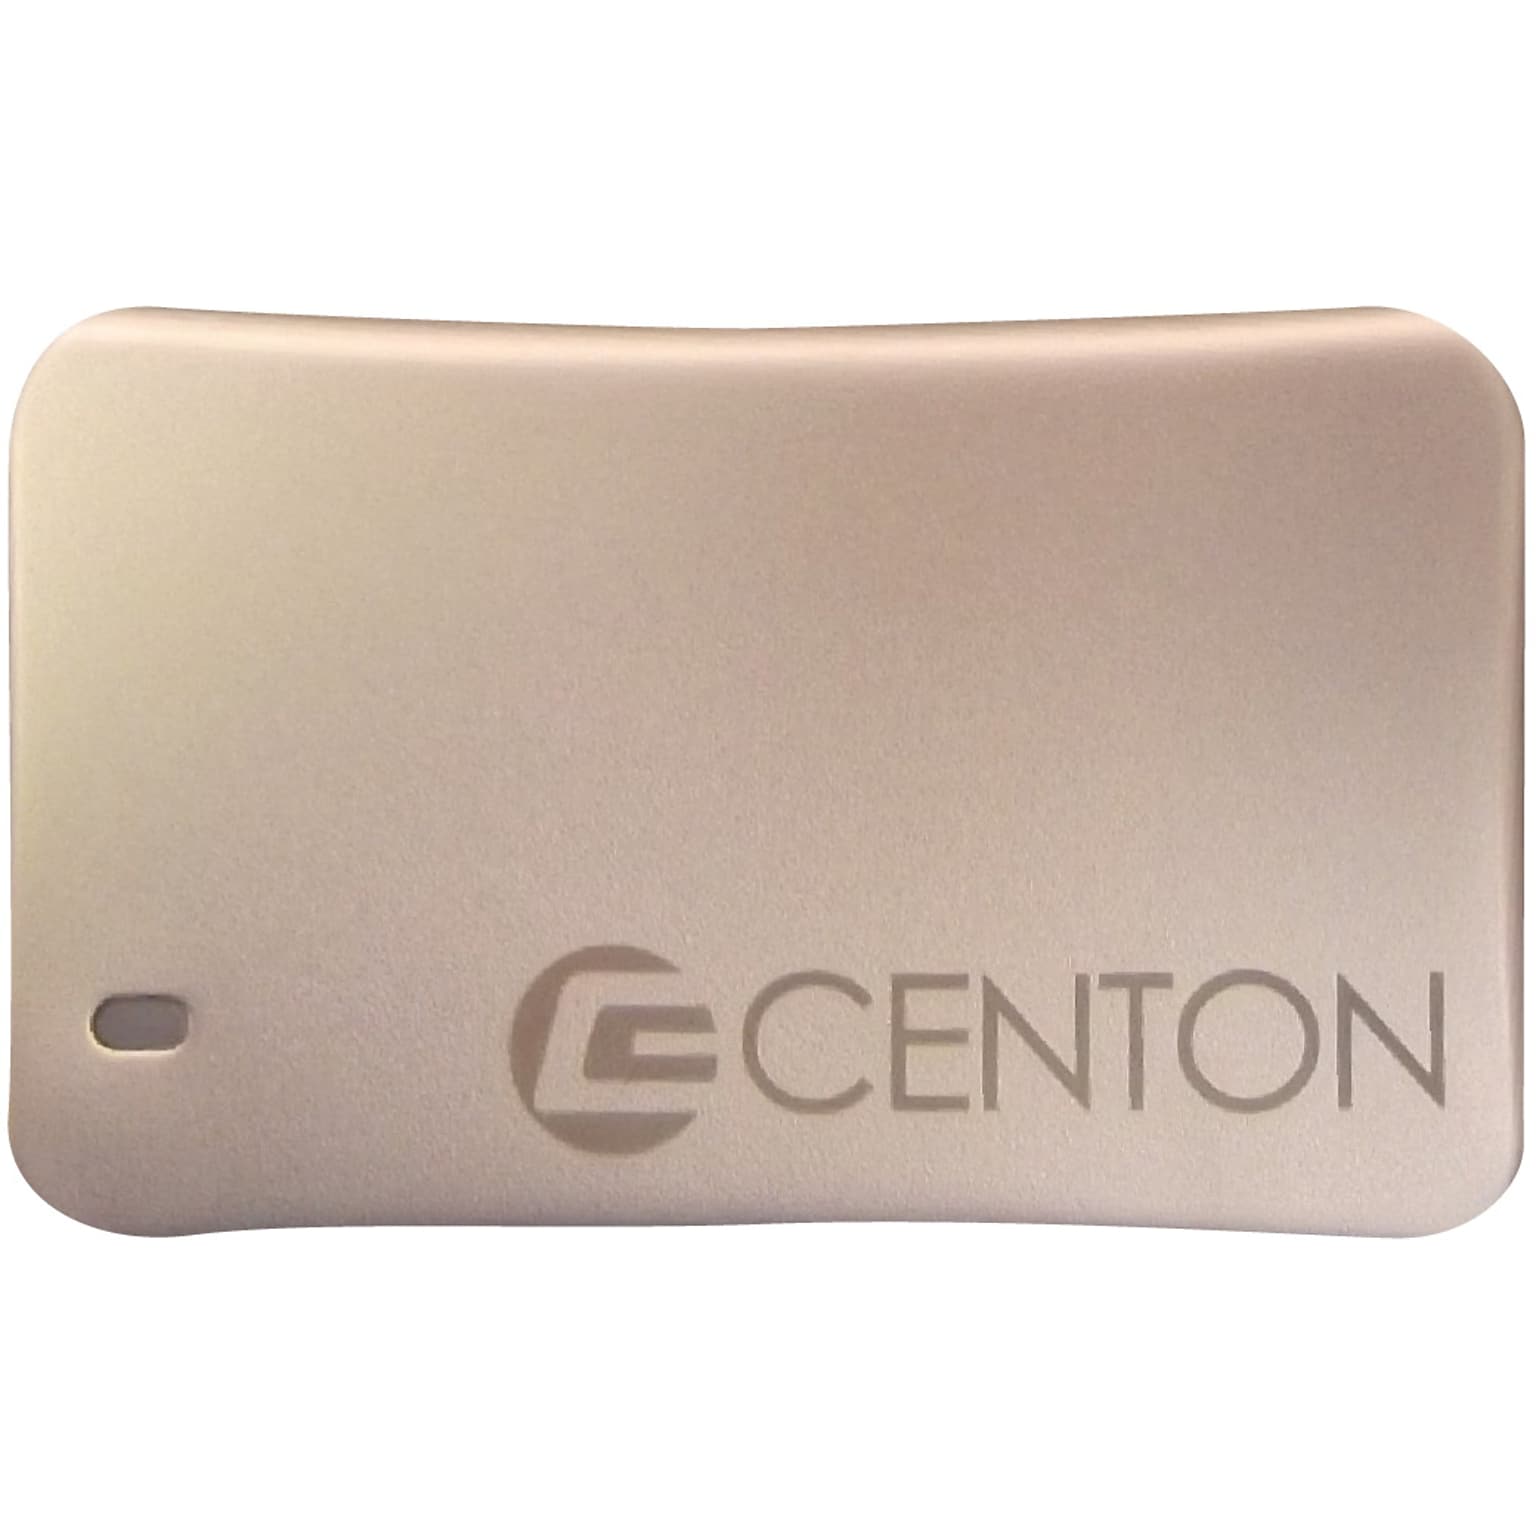 Centon S1-S3M-960.1 960GB USB-C External Solid State Drive